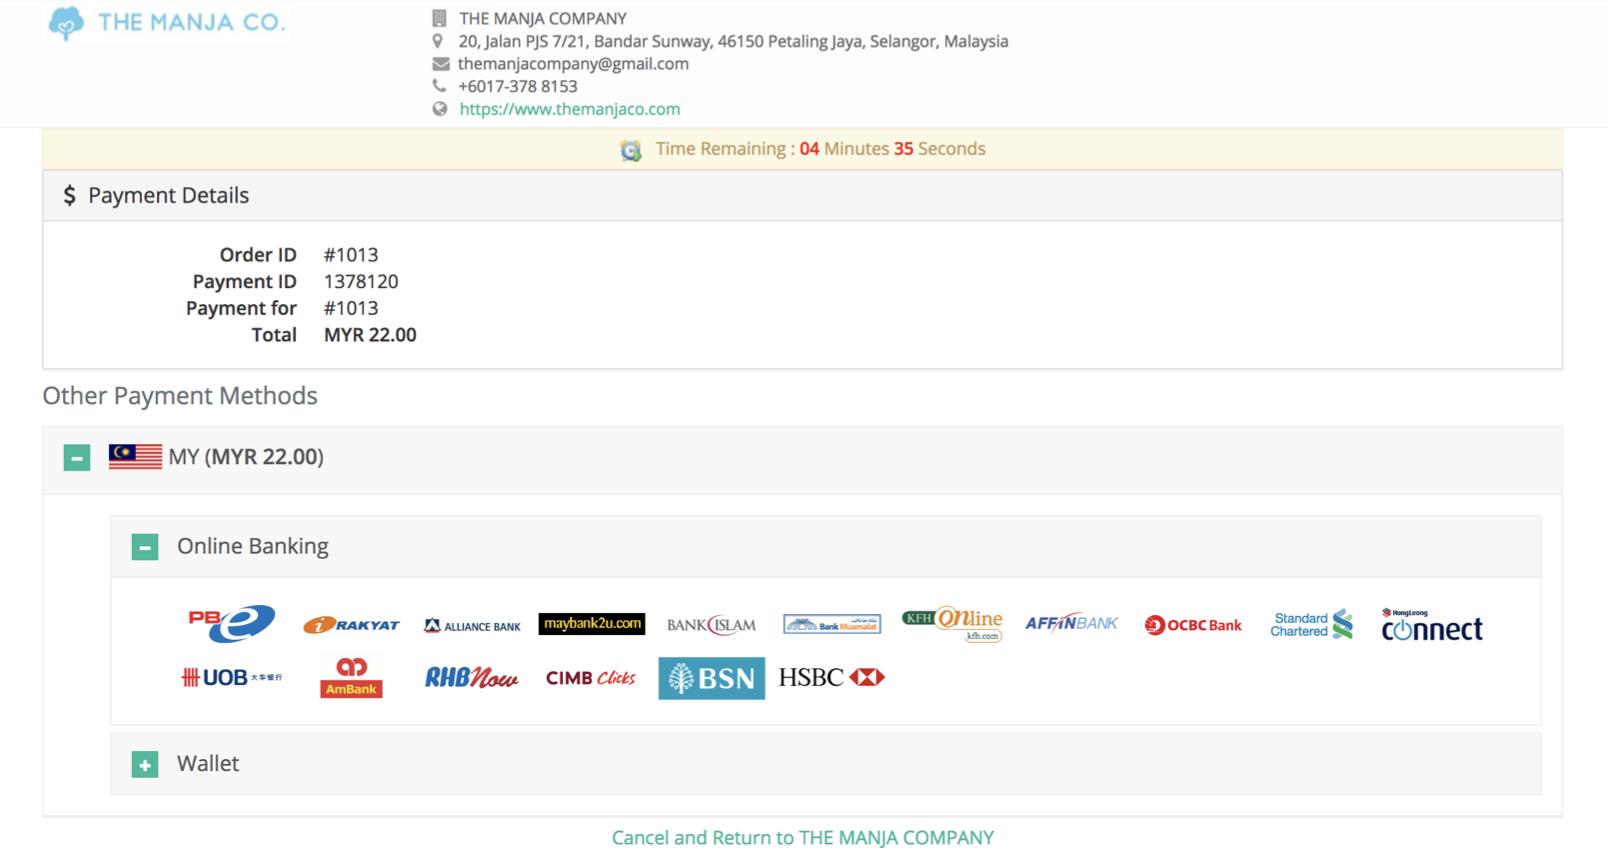 The Manja Company website’s pick up order guide. Step 5 in the ordering process. Screenshot shows the options available on eGHL's secure payment page if "Online Banking & E-Wallet via eGHL" was selected as the payment method. All of the participating banks and e-wallets available are shown. "Nappies by The Manja Company" is the hot new baby diapers brand in Malaysia.